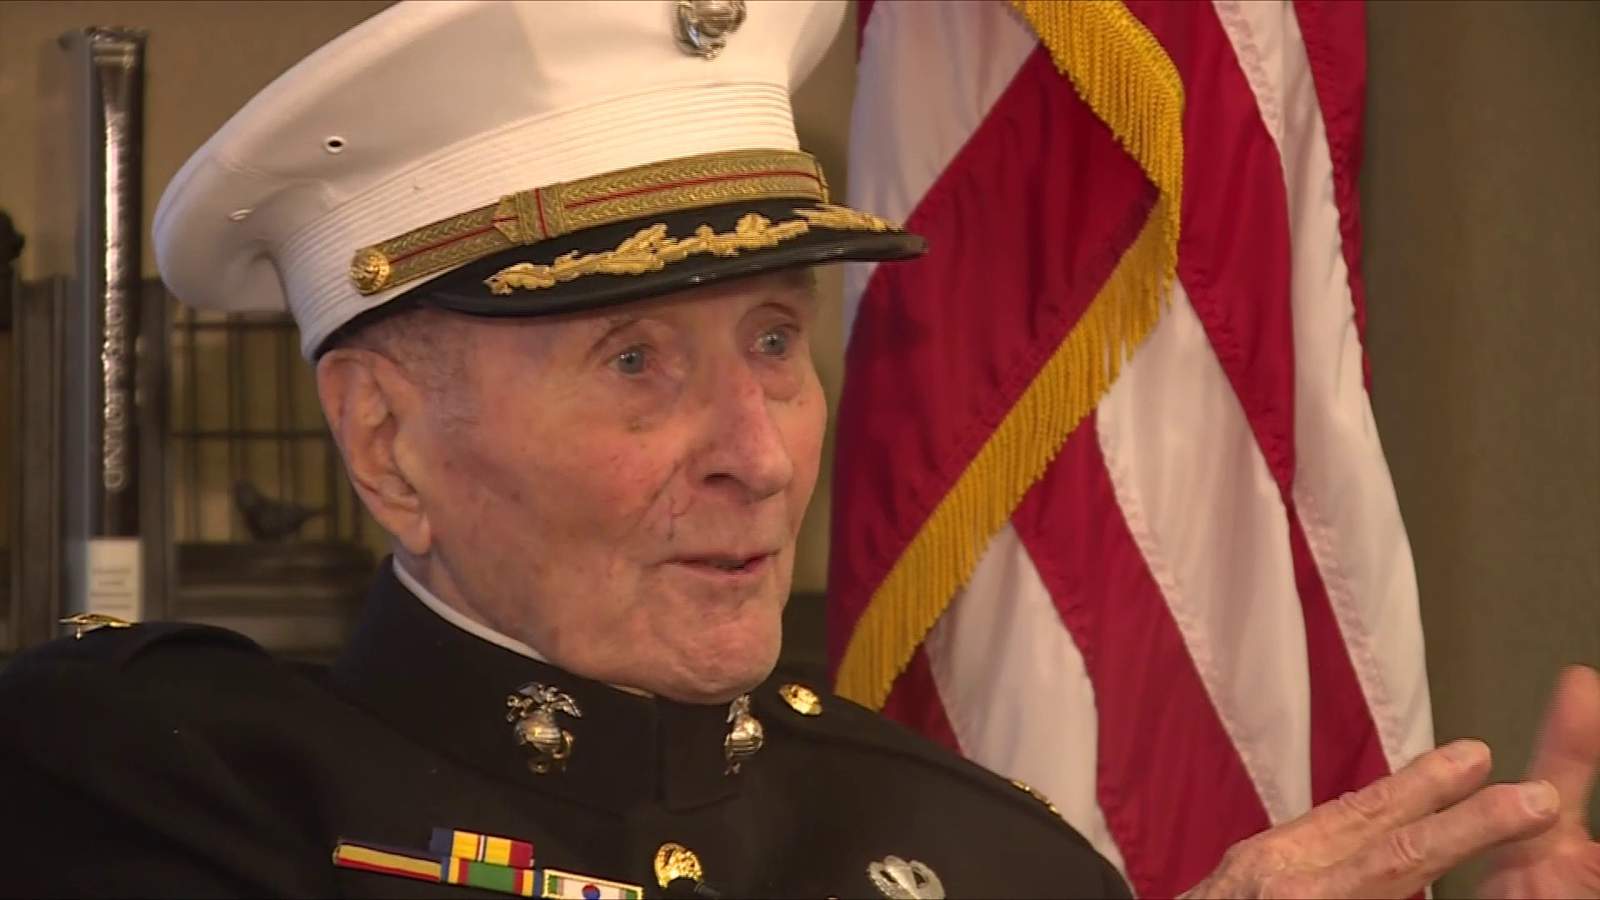 104-year-old WWII veteran asking for Valentine’s Day cards